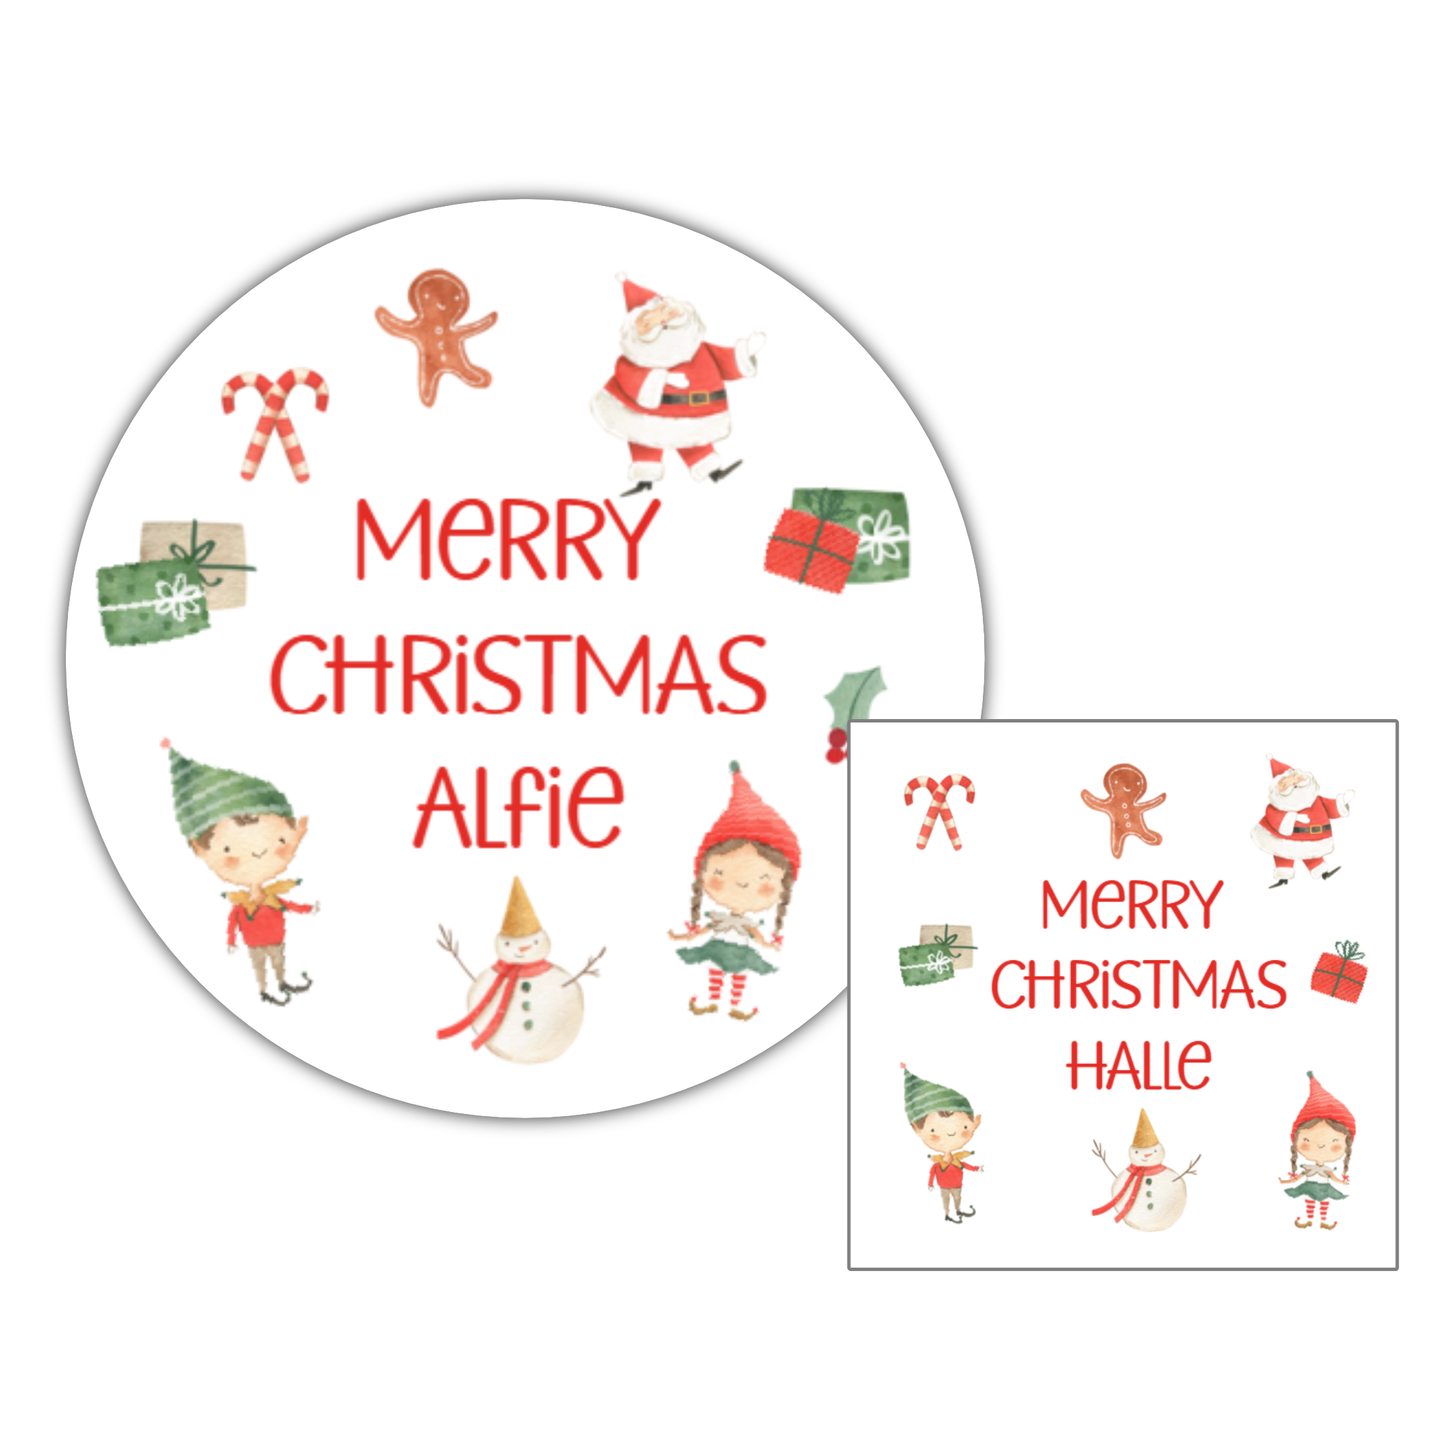 Personalised Christmas Name Stickers Elf Boy Girl For Gift Wrapping